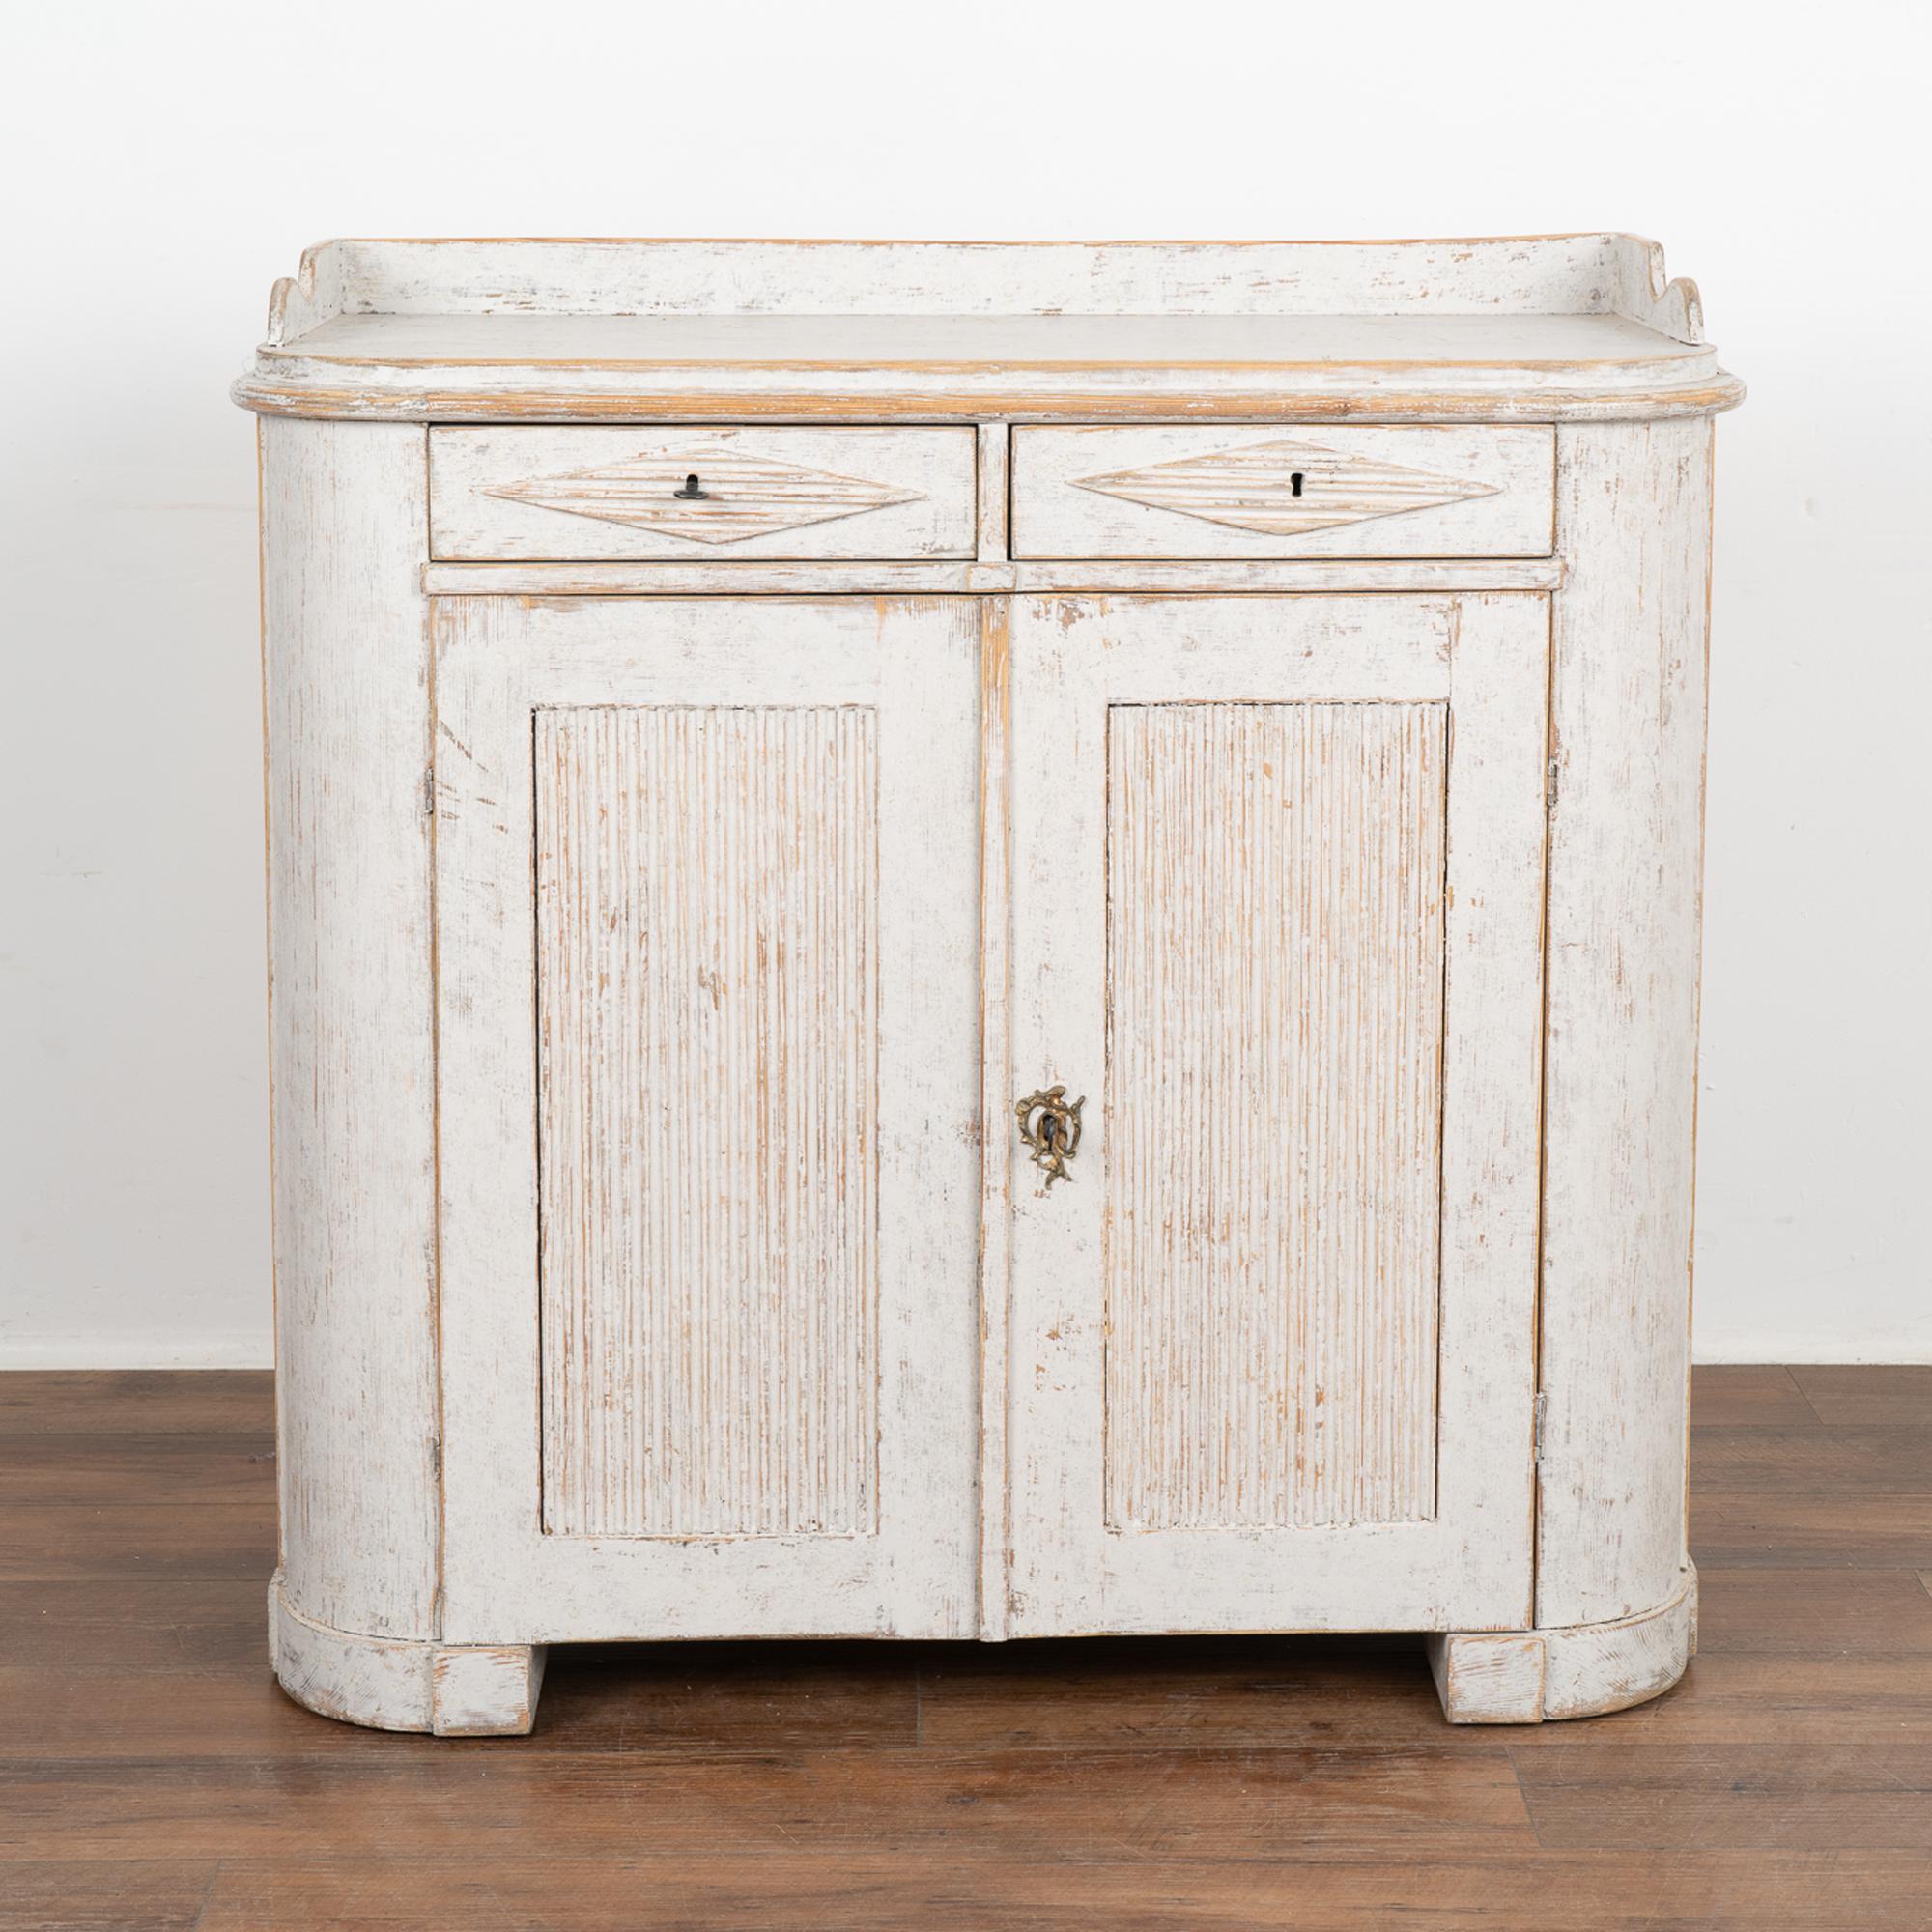 Swedish White Sideboard Cabinet from Sweden, circa 1860-80